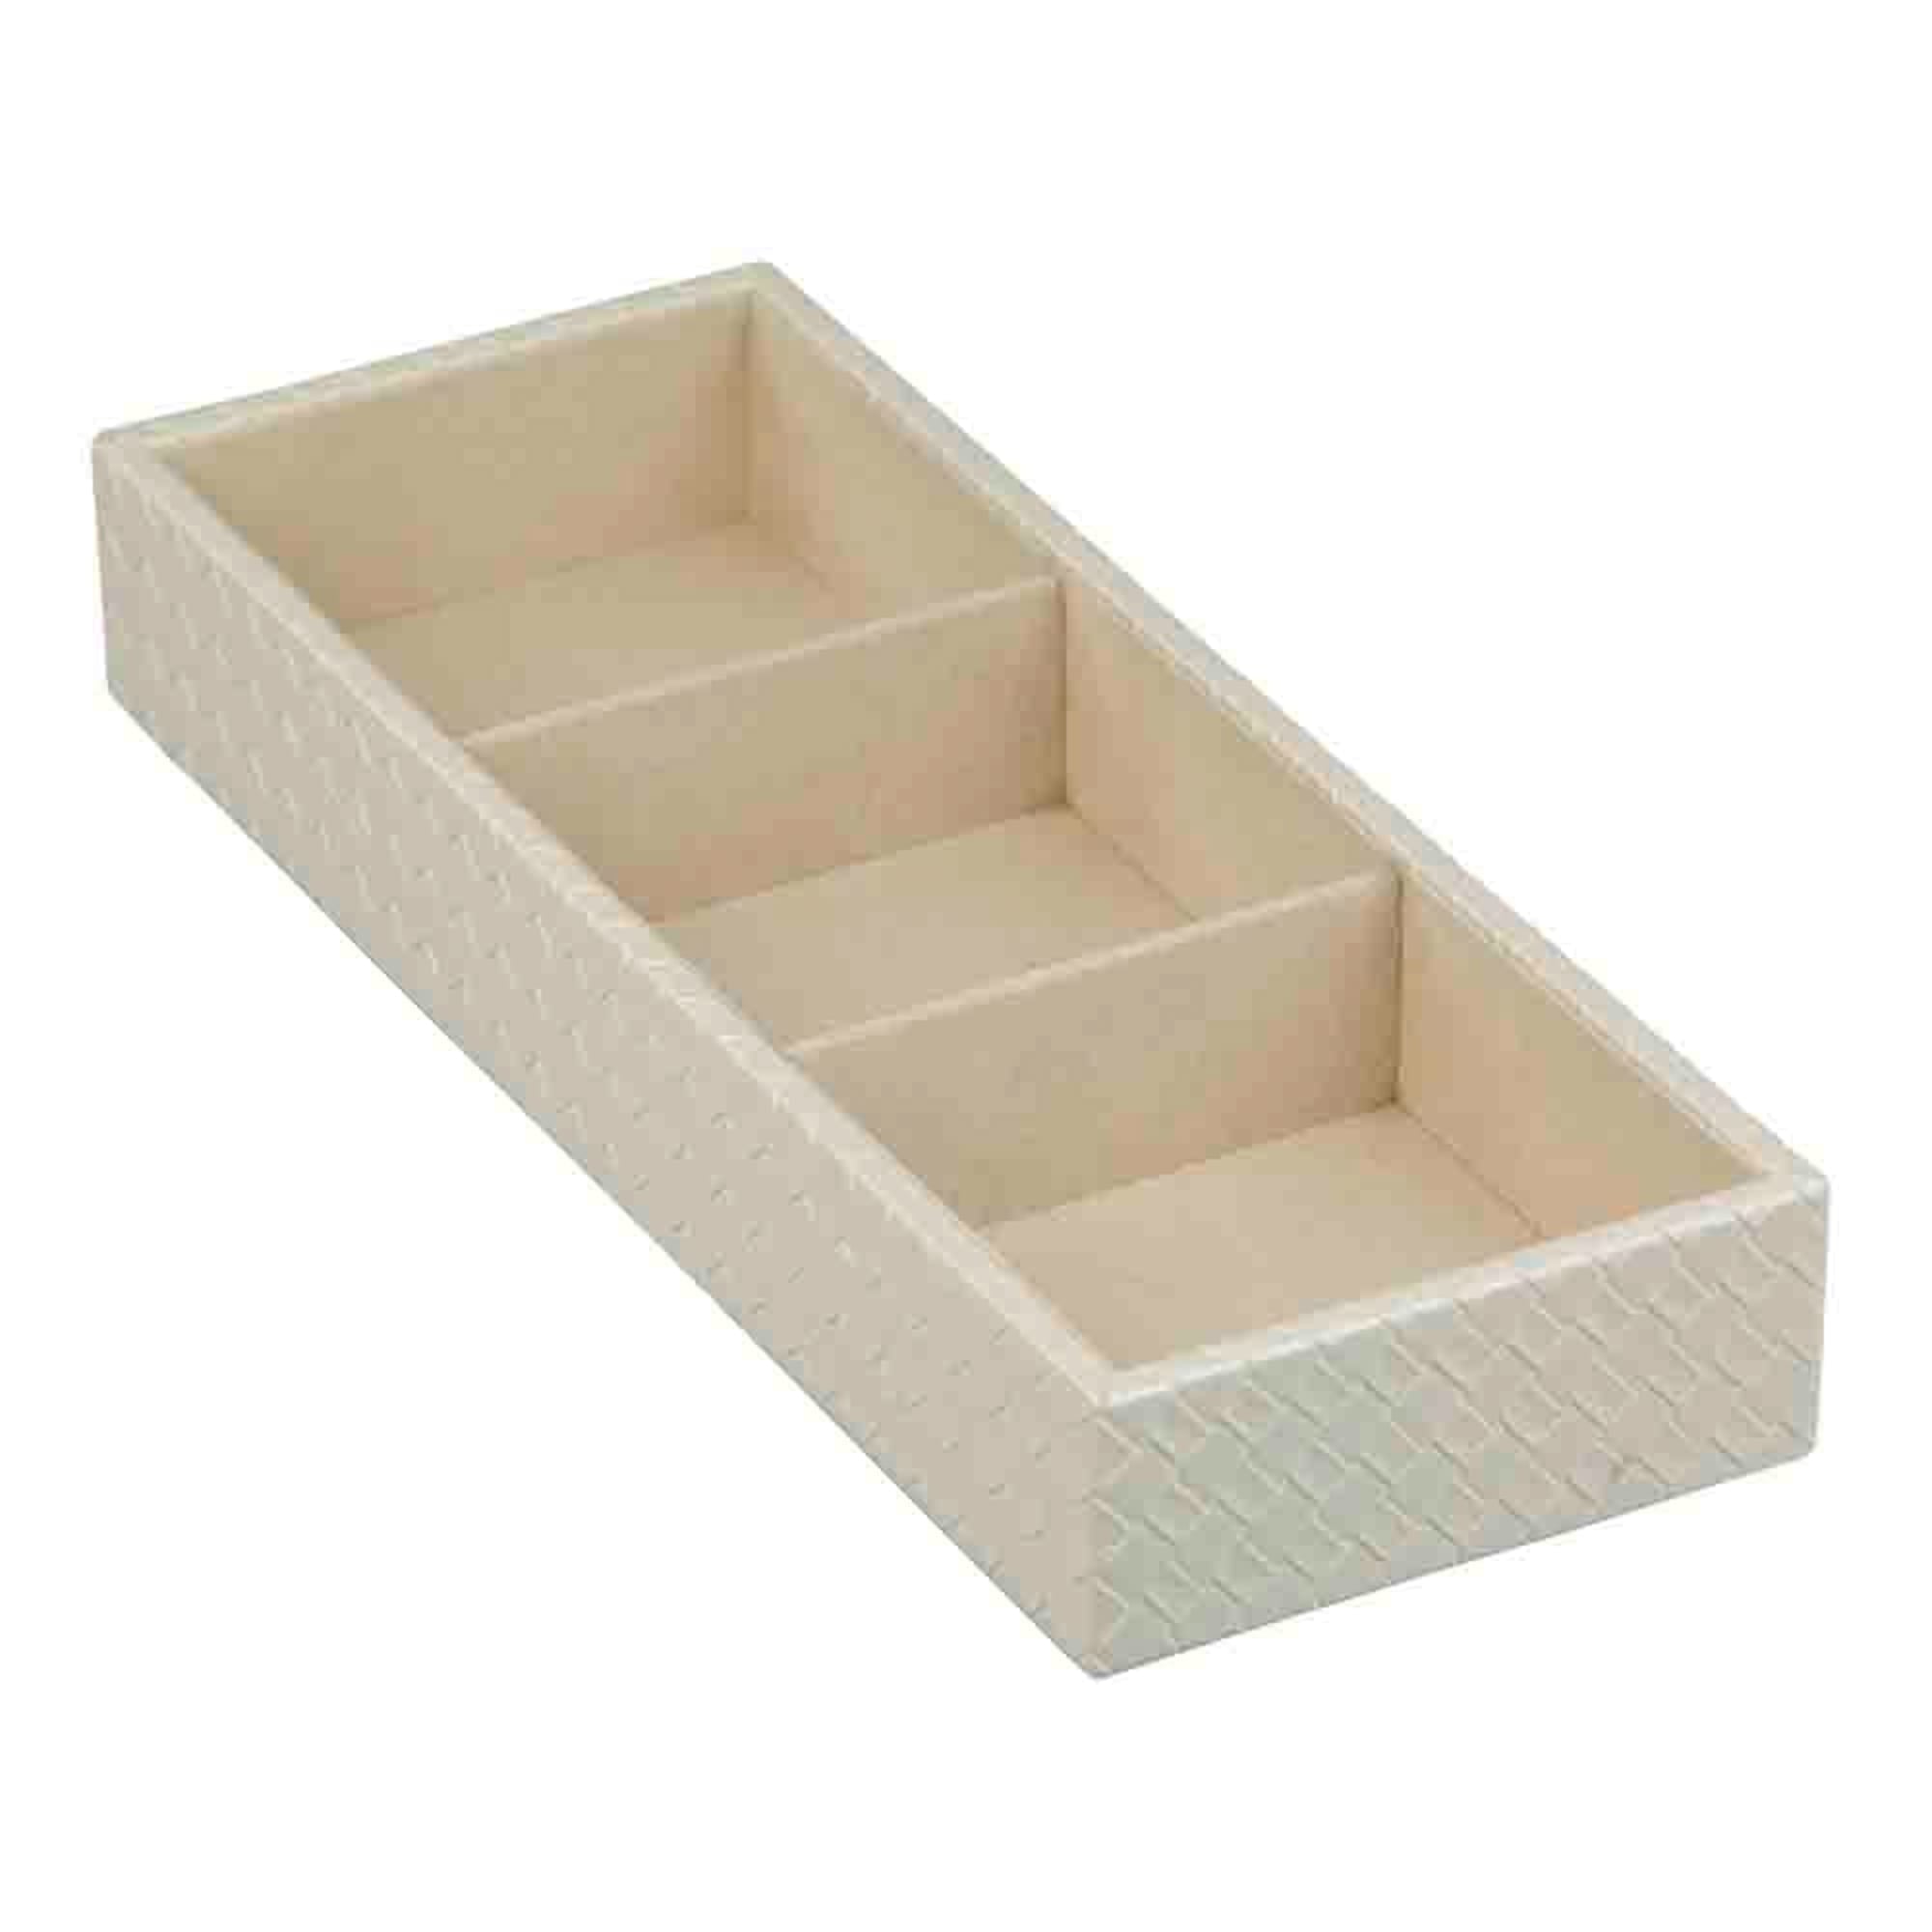 Home Basics 3 Compartment Jewelry Organizer $5.00 EACH, CASE PACK OF 6